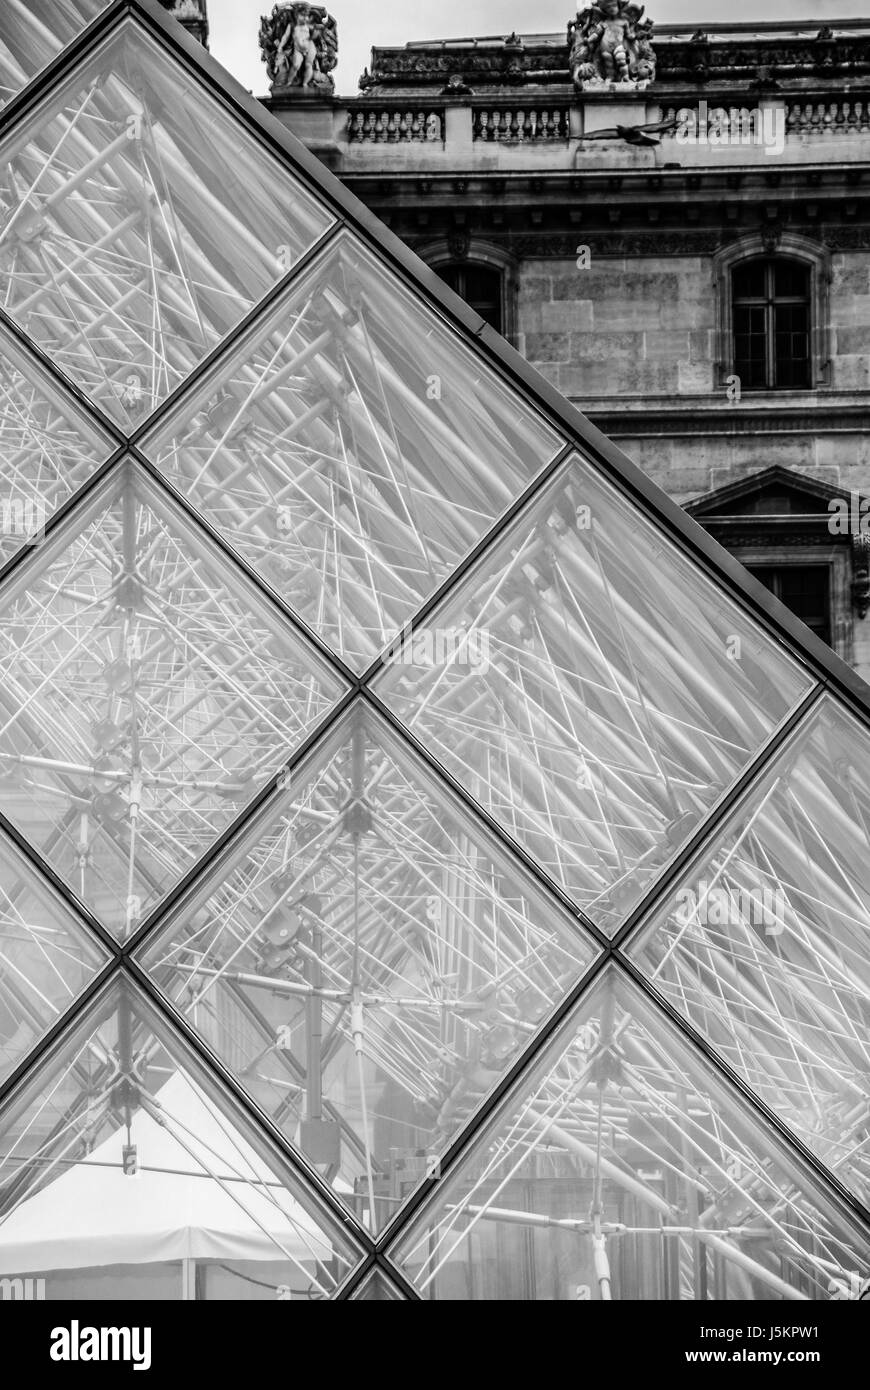 Glass pyramid at Louvre Paris Pyramide du Louvre black and white Stock Photo